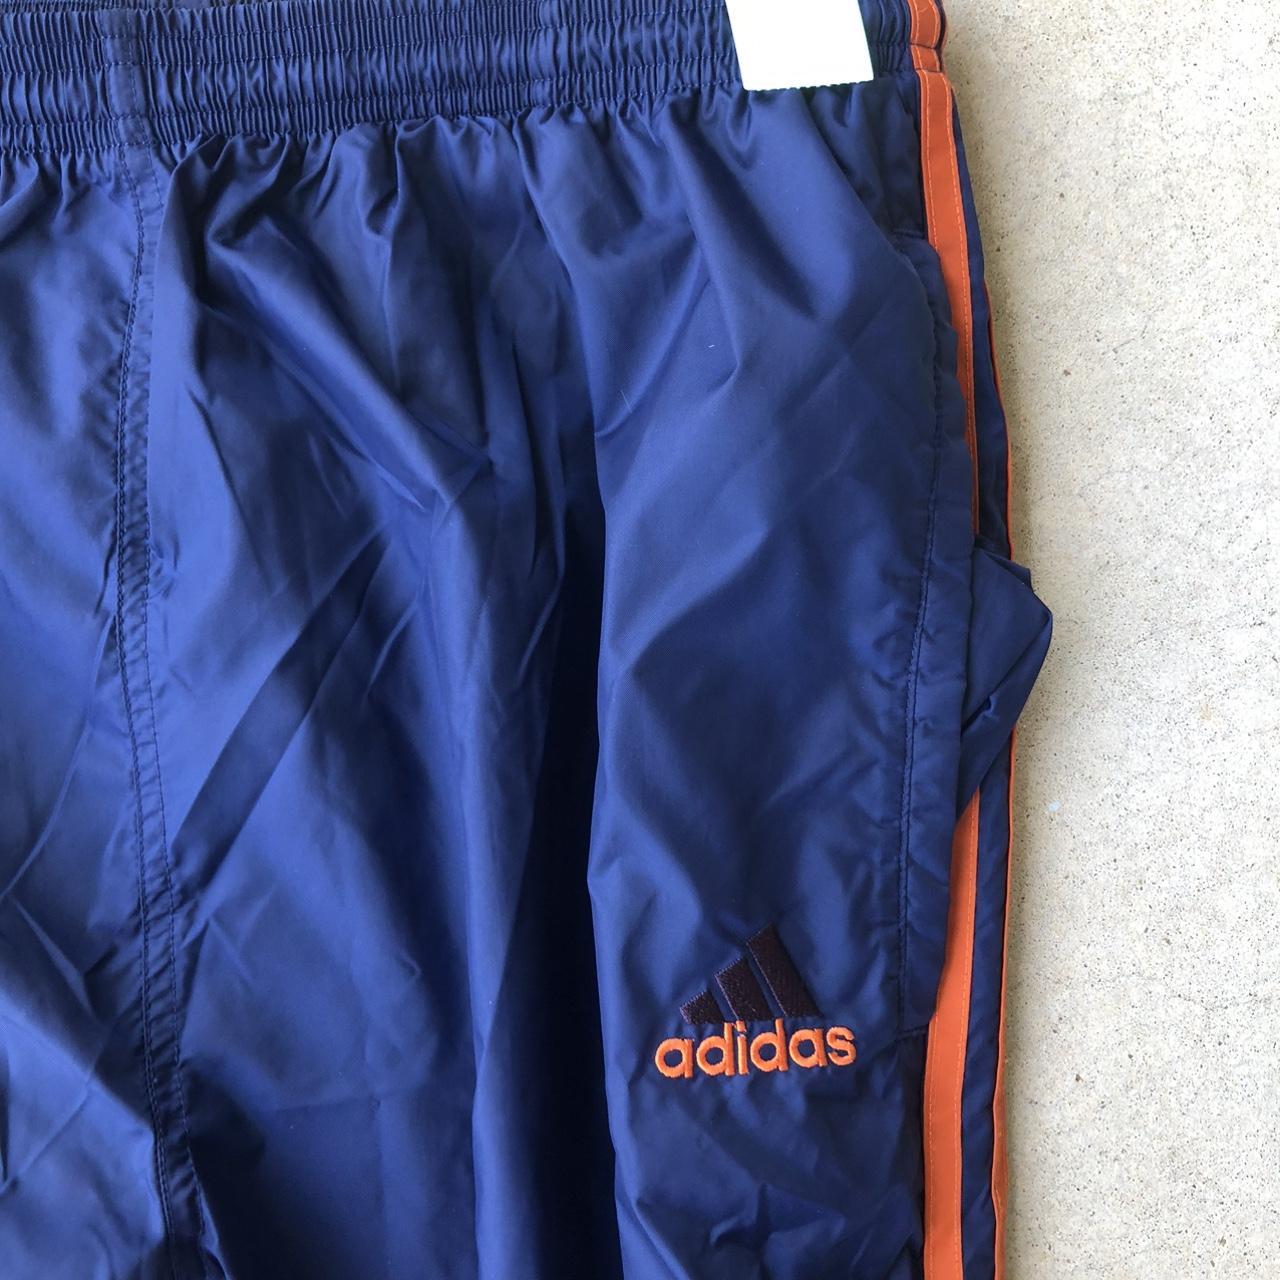 Adidas Men's Navy and Orange Joggers-tracksuits (2)